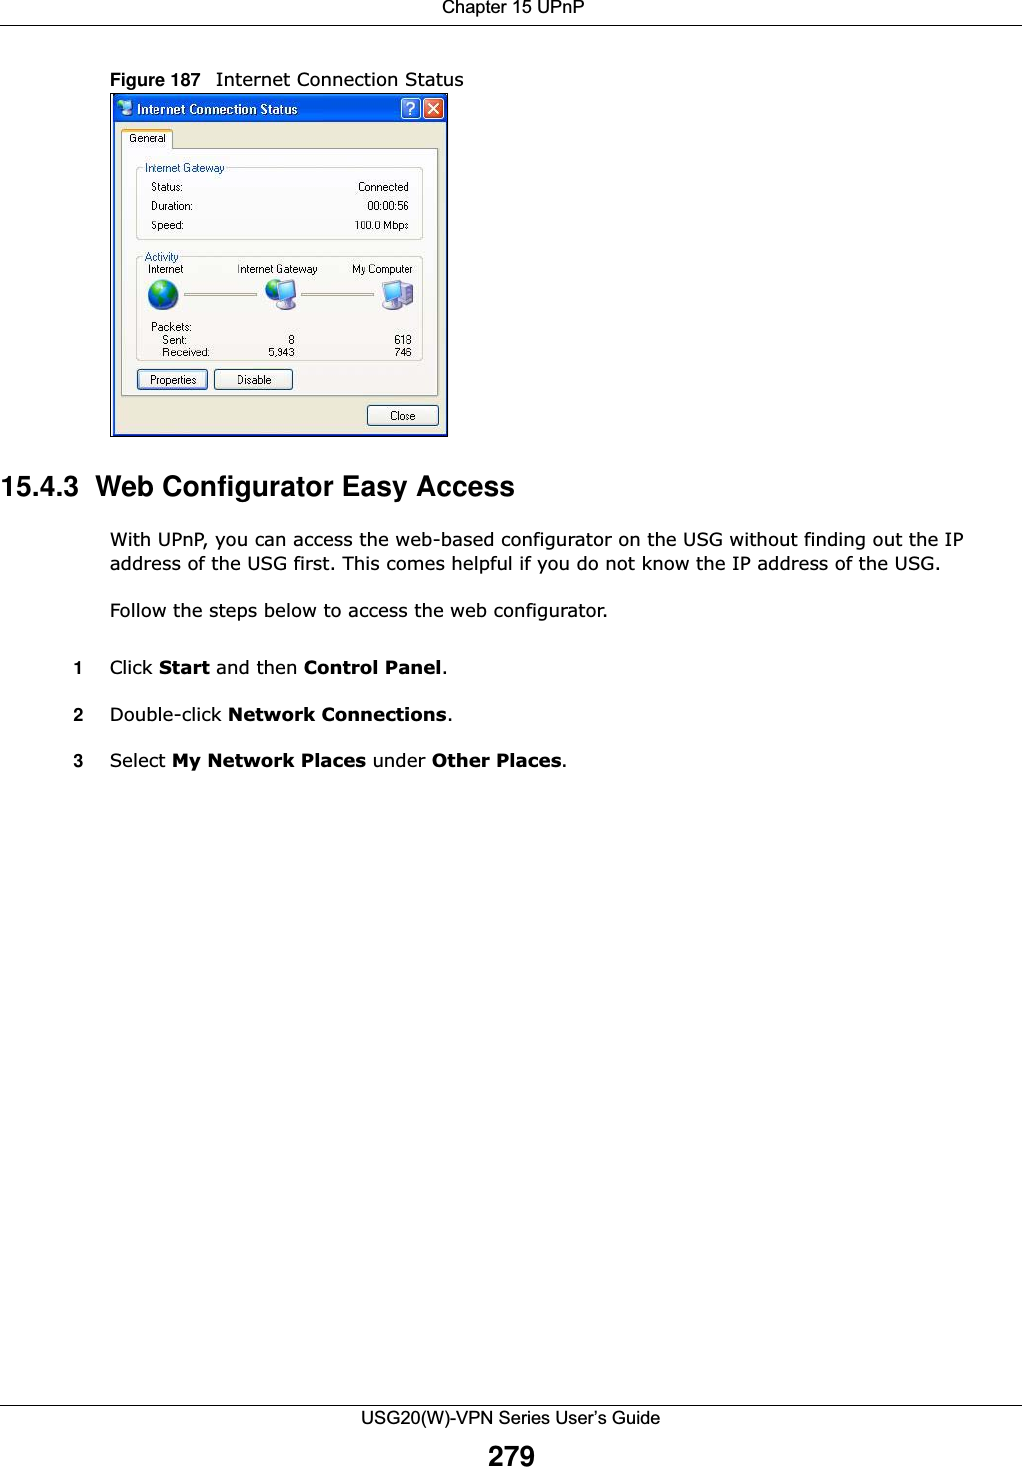  Chapter 15 UPnPUSG20(W)-VPN Series User’s Guide279Figure 187   Internet Connection Status15.4.3  Web Configurator Easy AccessWith UPnP, you can access the web-based configurator on the USG without finding out the IP address of the USG first. This comes helpful if you do not know the IP address of the USG.Follow the steps below to access the web configurator.1Click Start and then Control Panel. 2Double-click Network Connections. 3Select My Network Places under Other Places. 